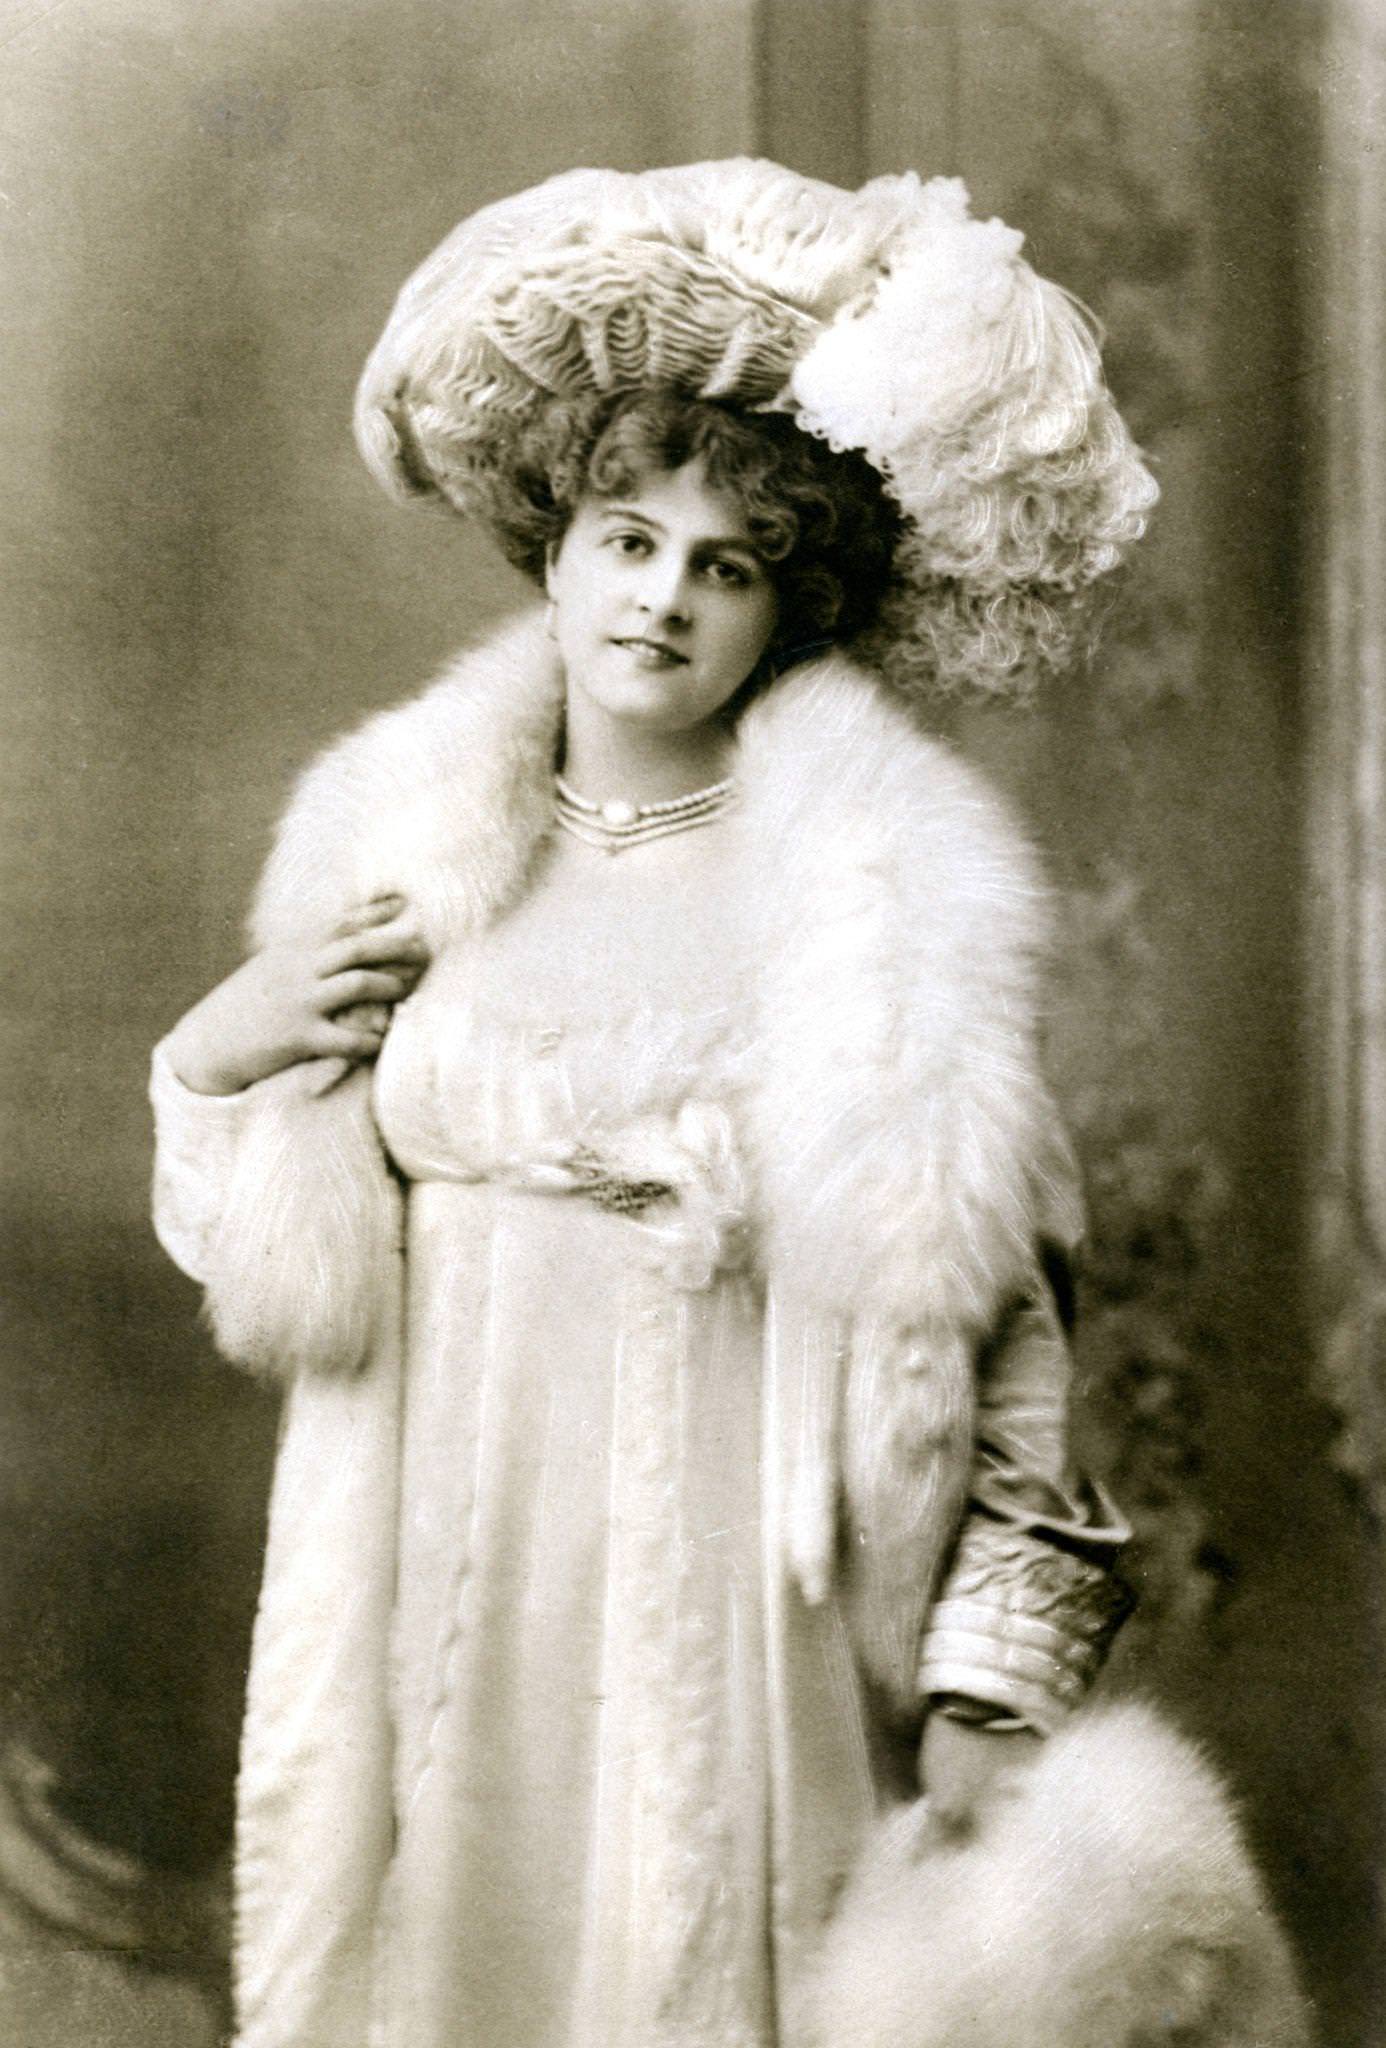 Marie Studholme exudes grace and style in her chic hat